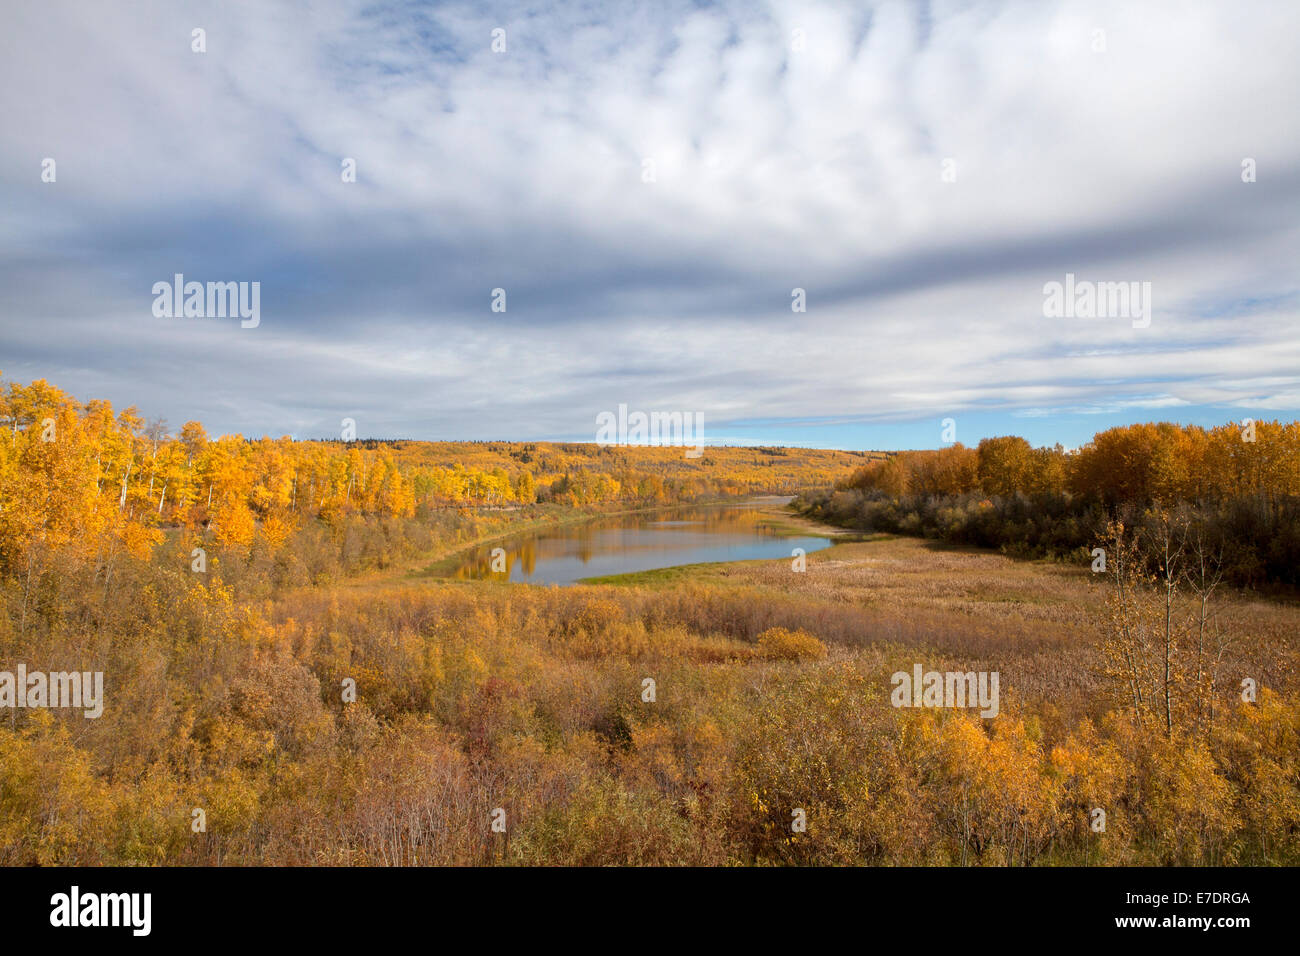 Landscape view of Boreal Forest in autumn, Alberta, Canada Stock Photo